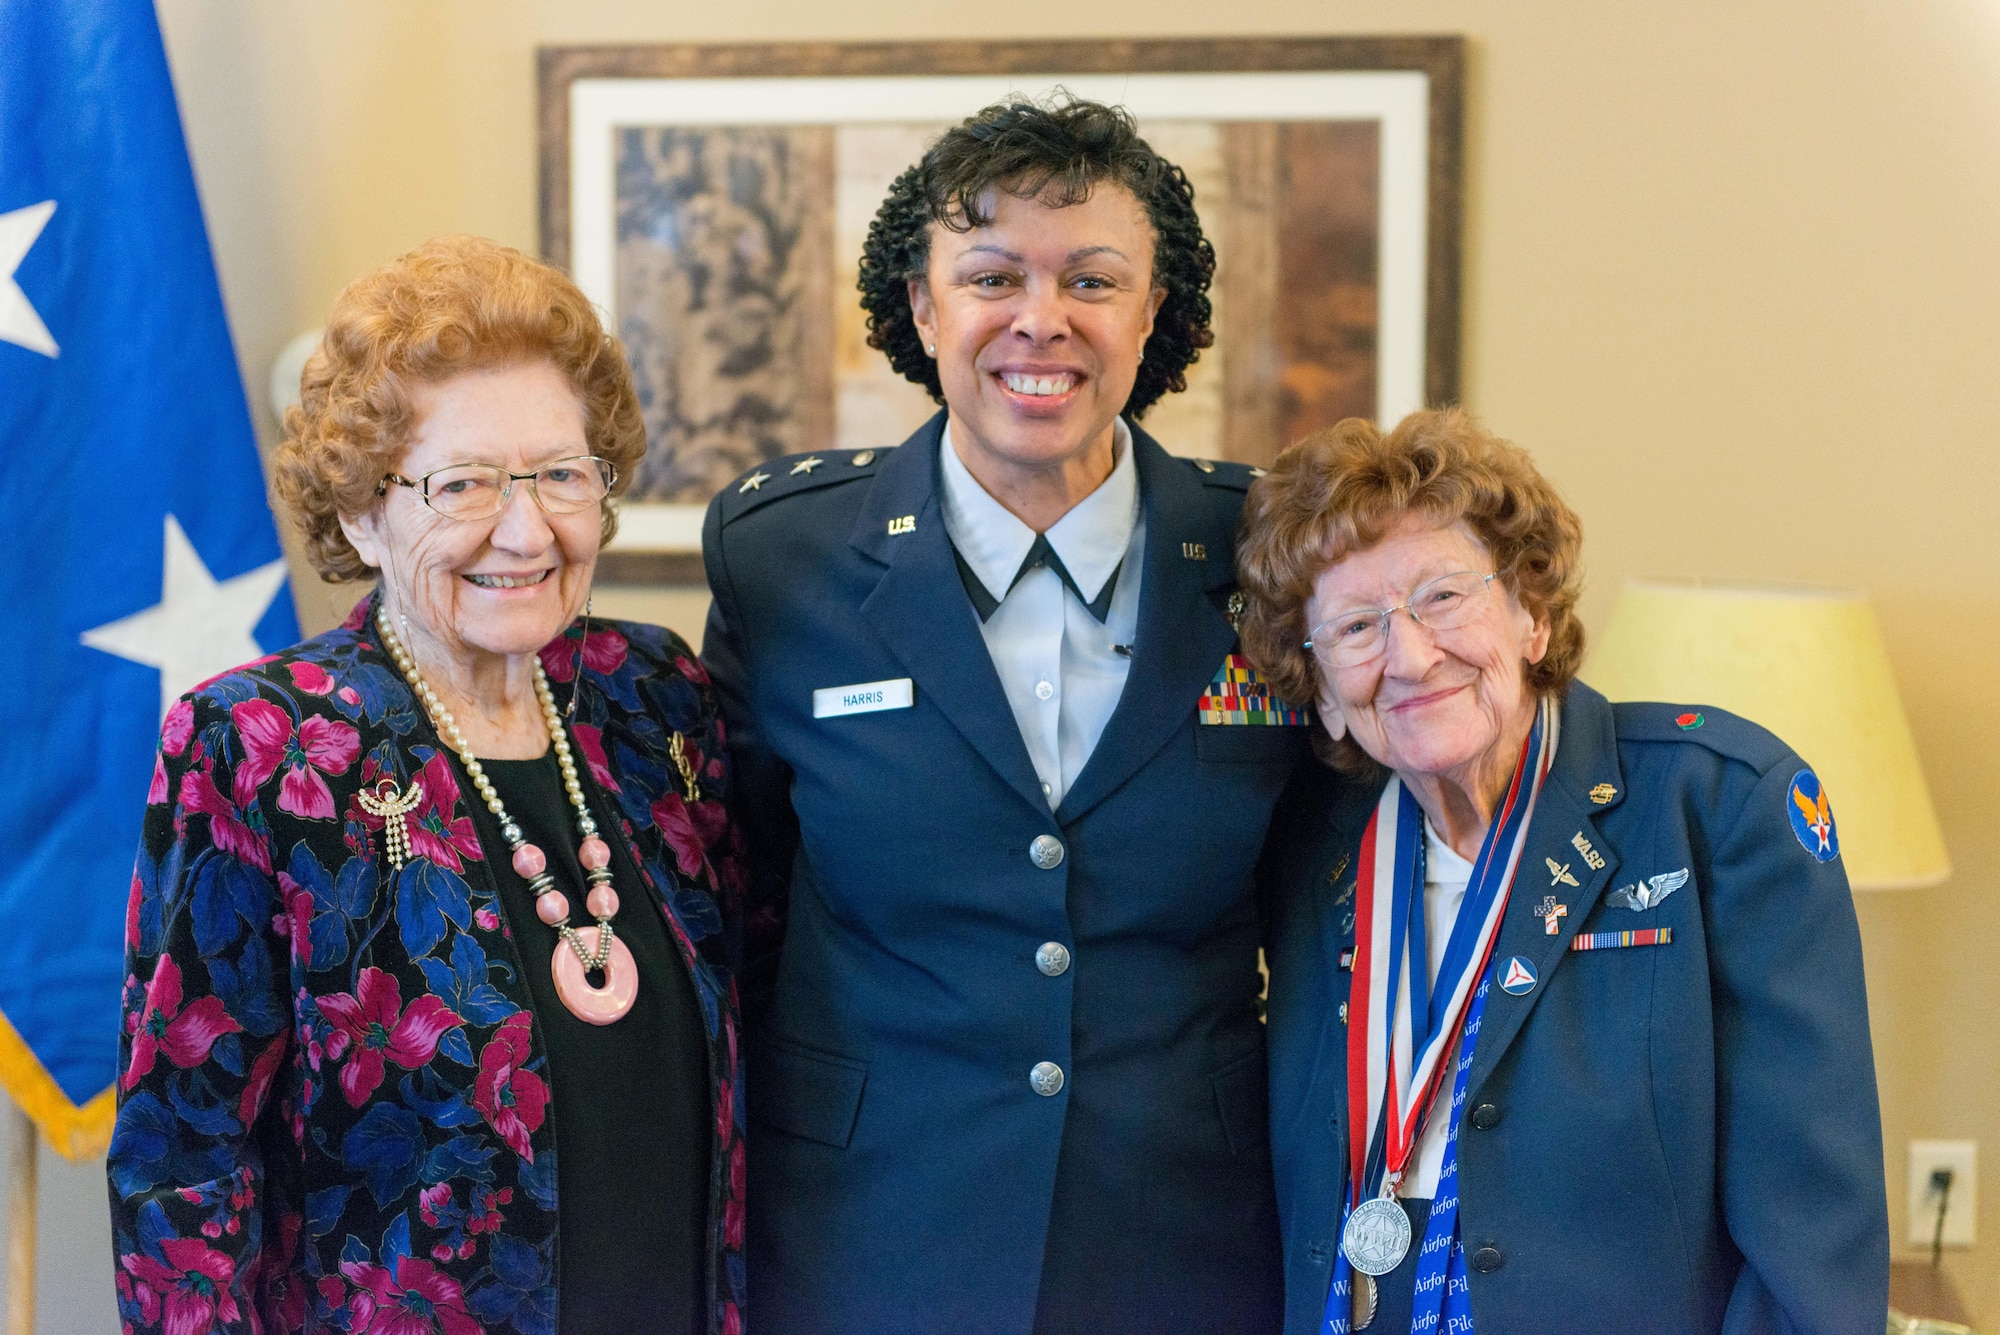 Ms. Cecelia Bell (left), Maj. Gen. Stayce Harris, 22nd Air Force commander (center), and Betty Strohfus (right) pose at the Congressional Gold Medal Ceremony in Faribault, Minn. on Jan. 7. Ms. Bell was presented with the Congressional Gold Medal for her service in the Civil Air Patrol during World War II. (U.S. Air Force photo by Captain William-Joseph Mojica)